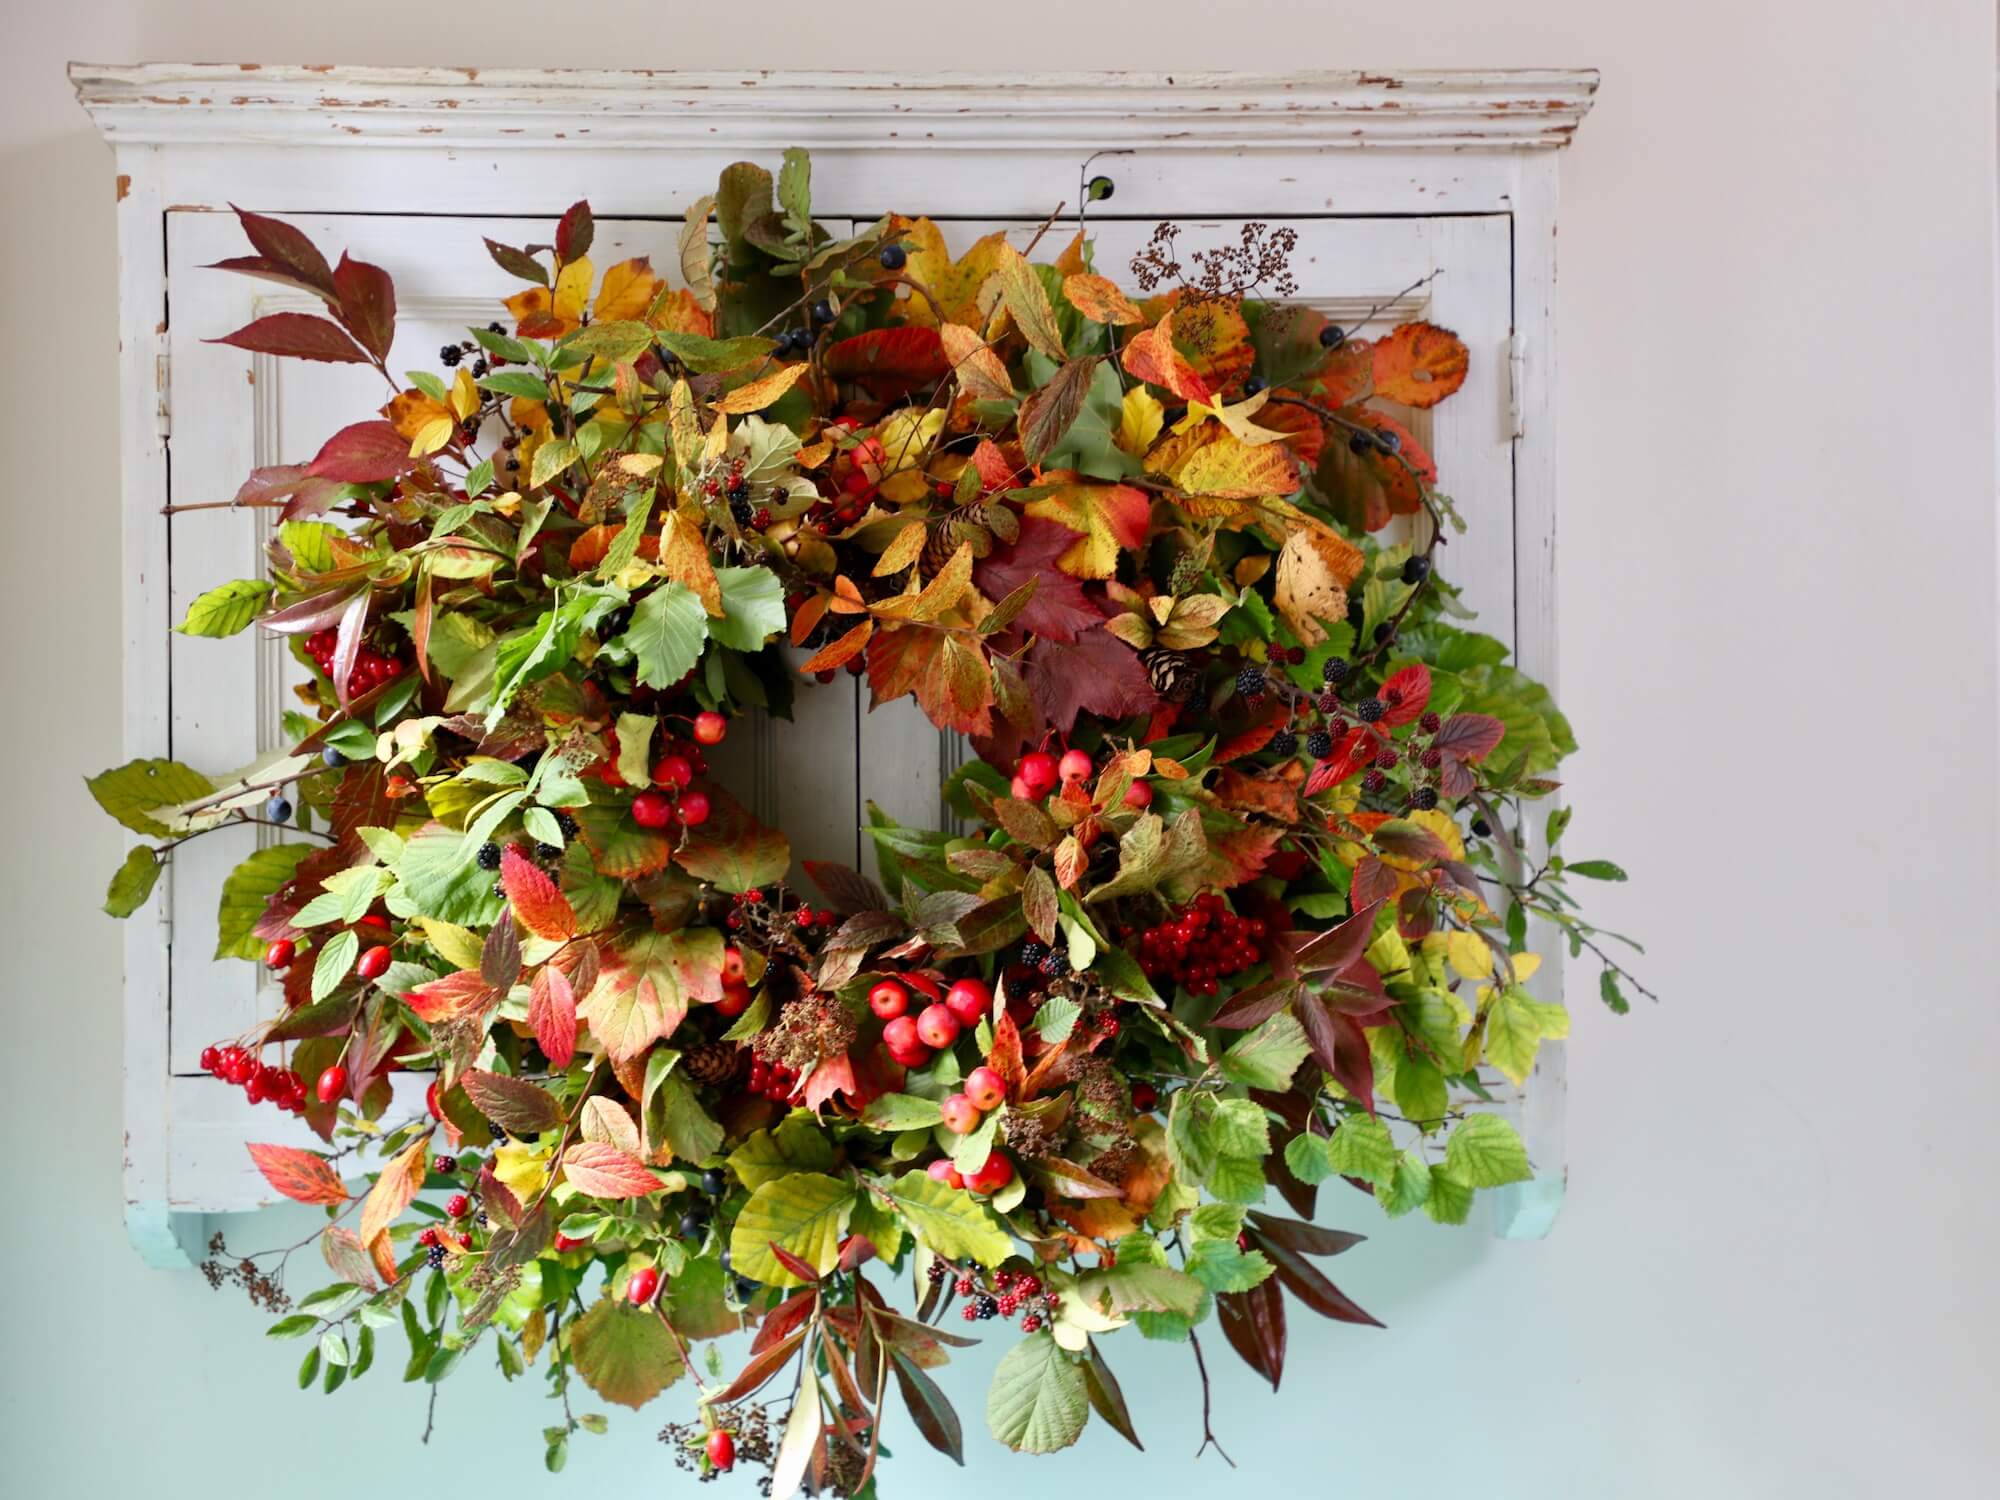 an autumn wreath made up of leaves and berries from a September garden